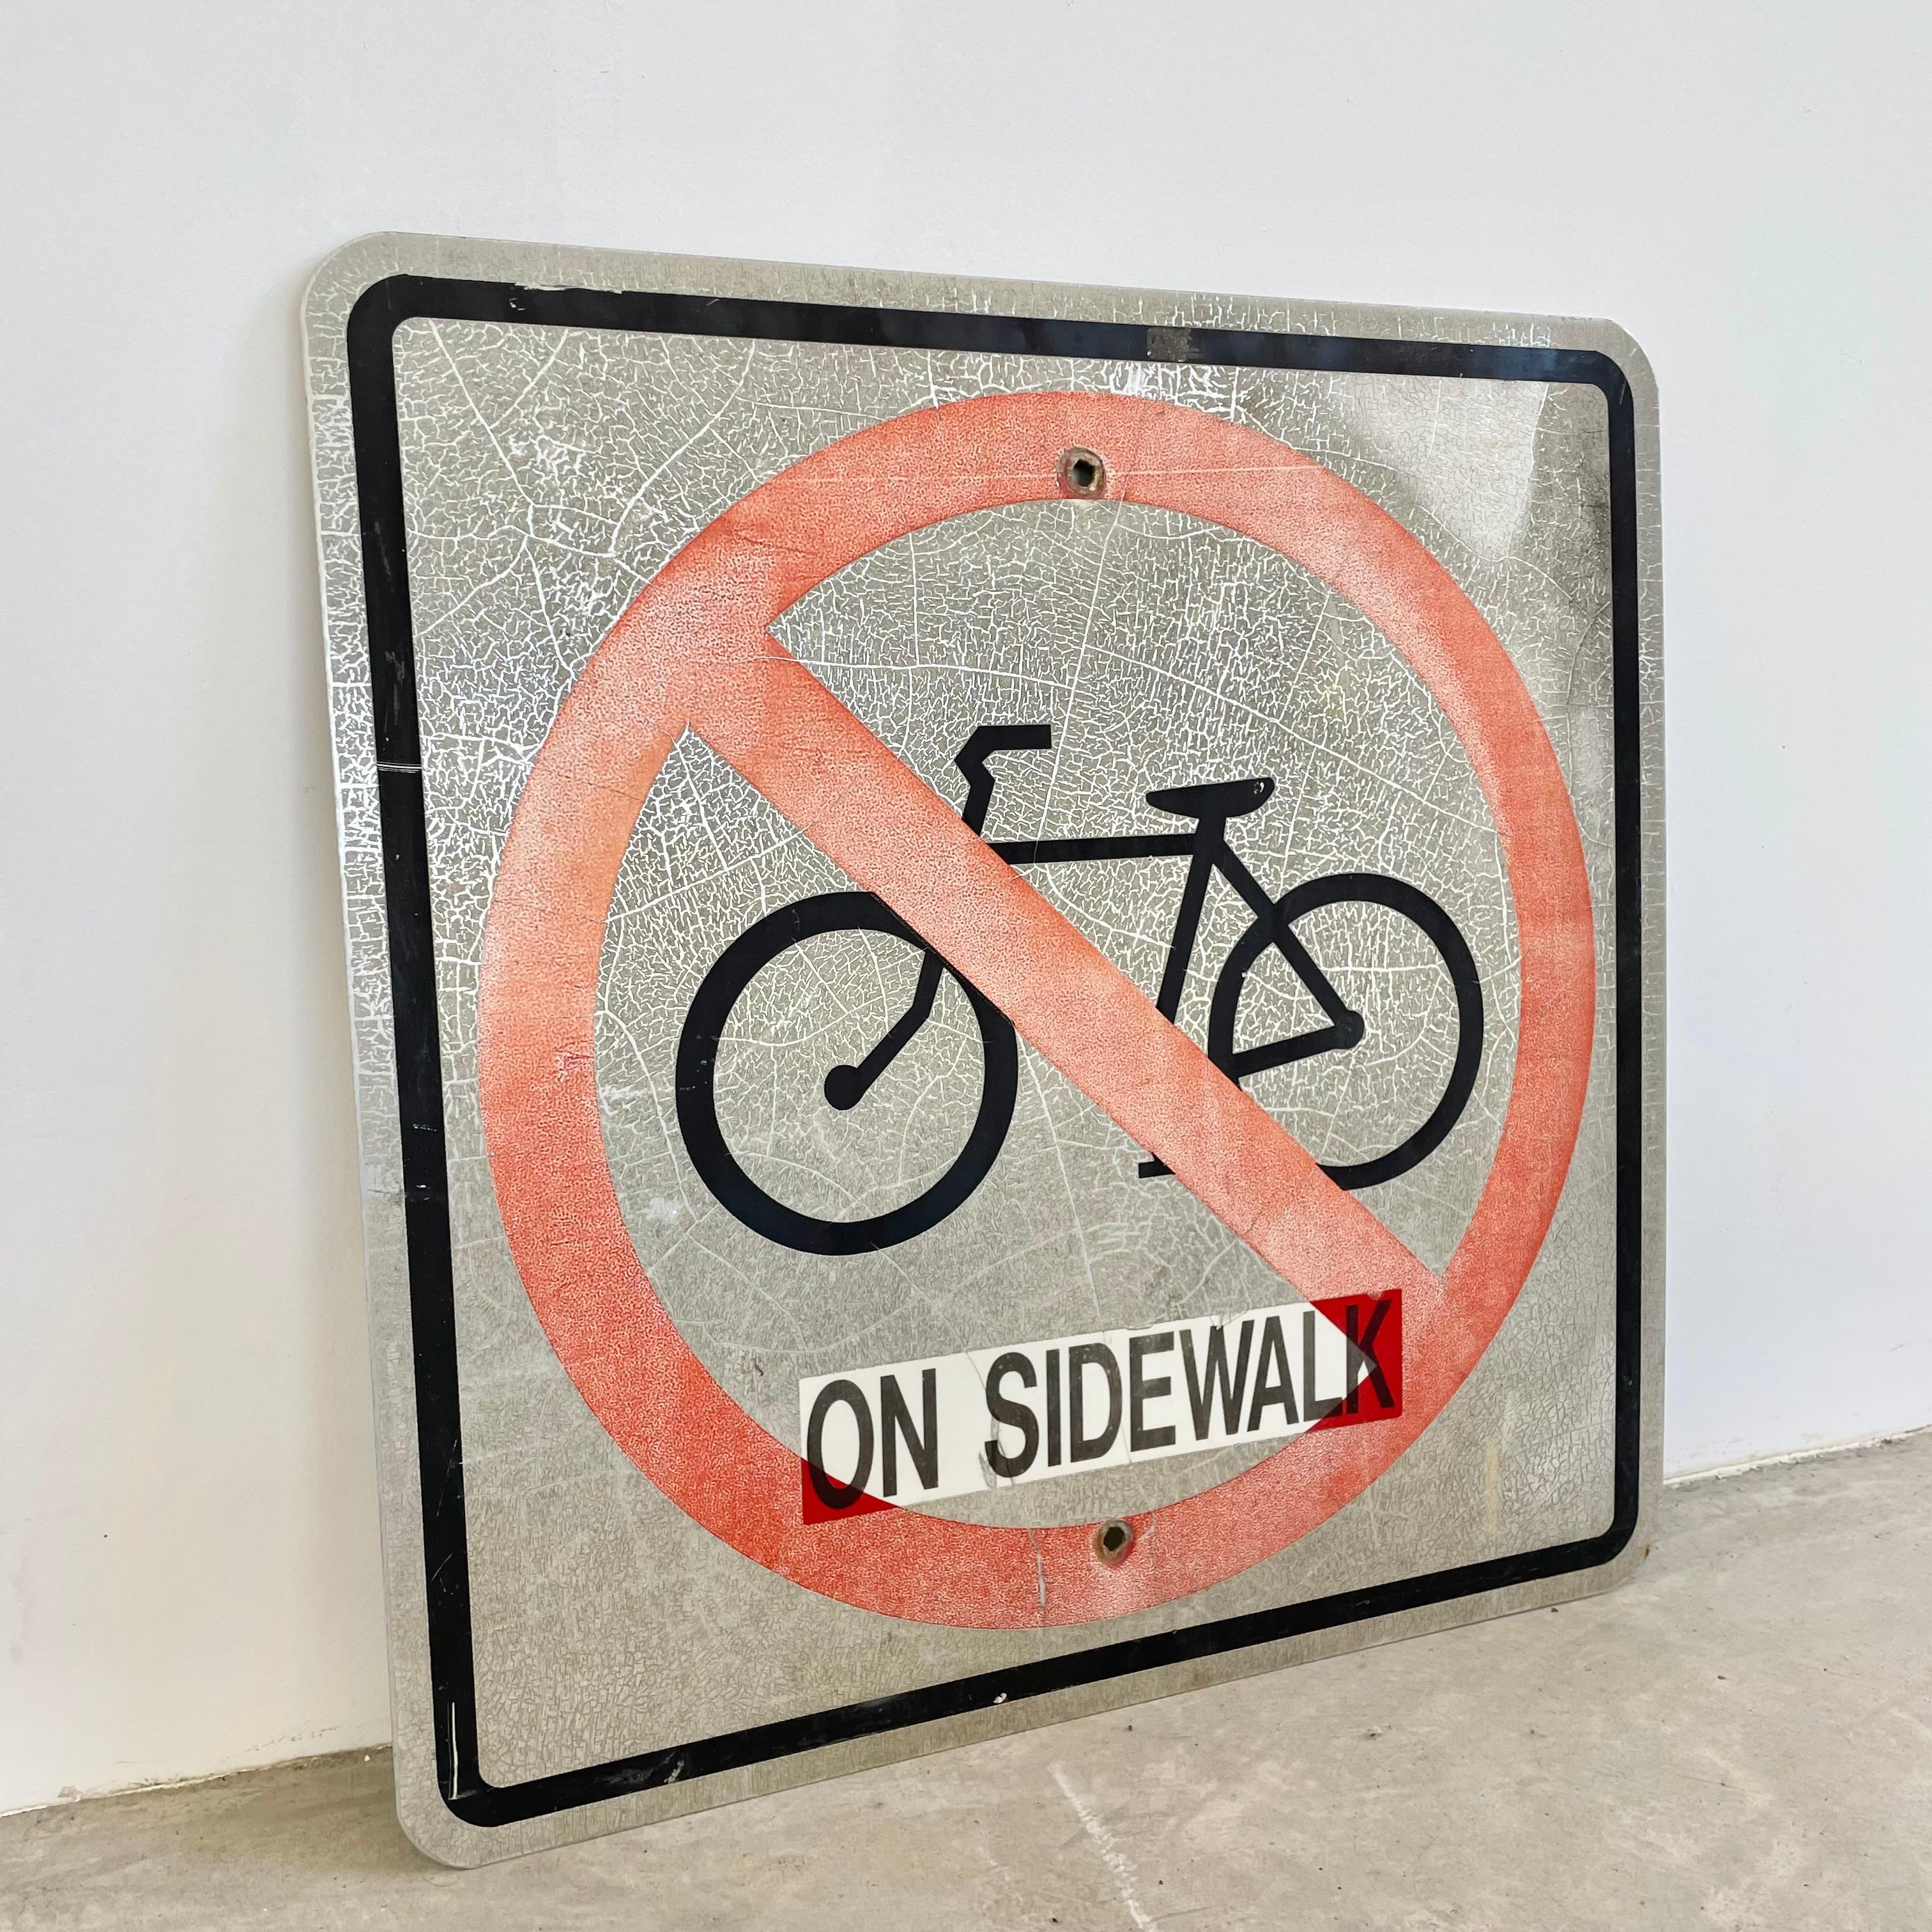 Vintage 'no bikes on sidewalk' sign with incredible sunburn weathering patina. Steel sign featuring a bicycle encircled by a red ring with a line through it. Great faded coloring give this piece unique character. Cool vintage graphics. Perfect for a